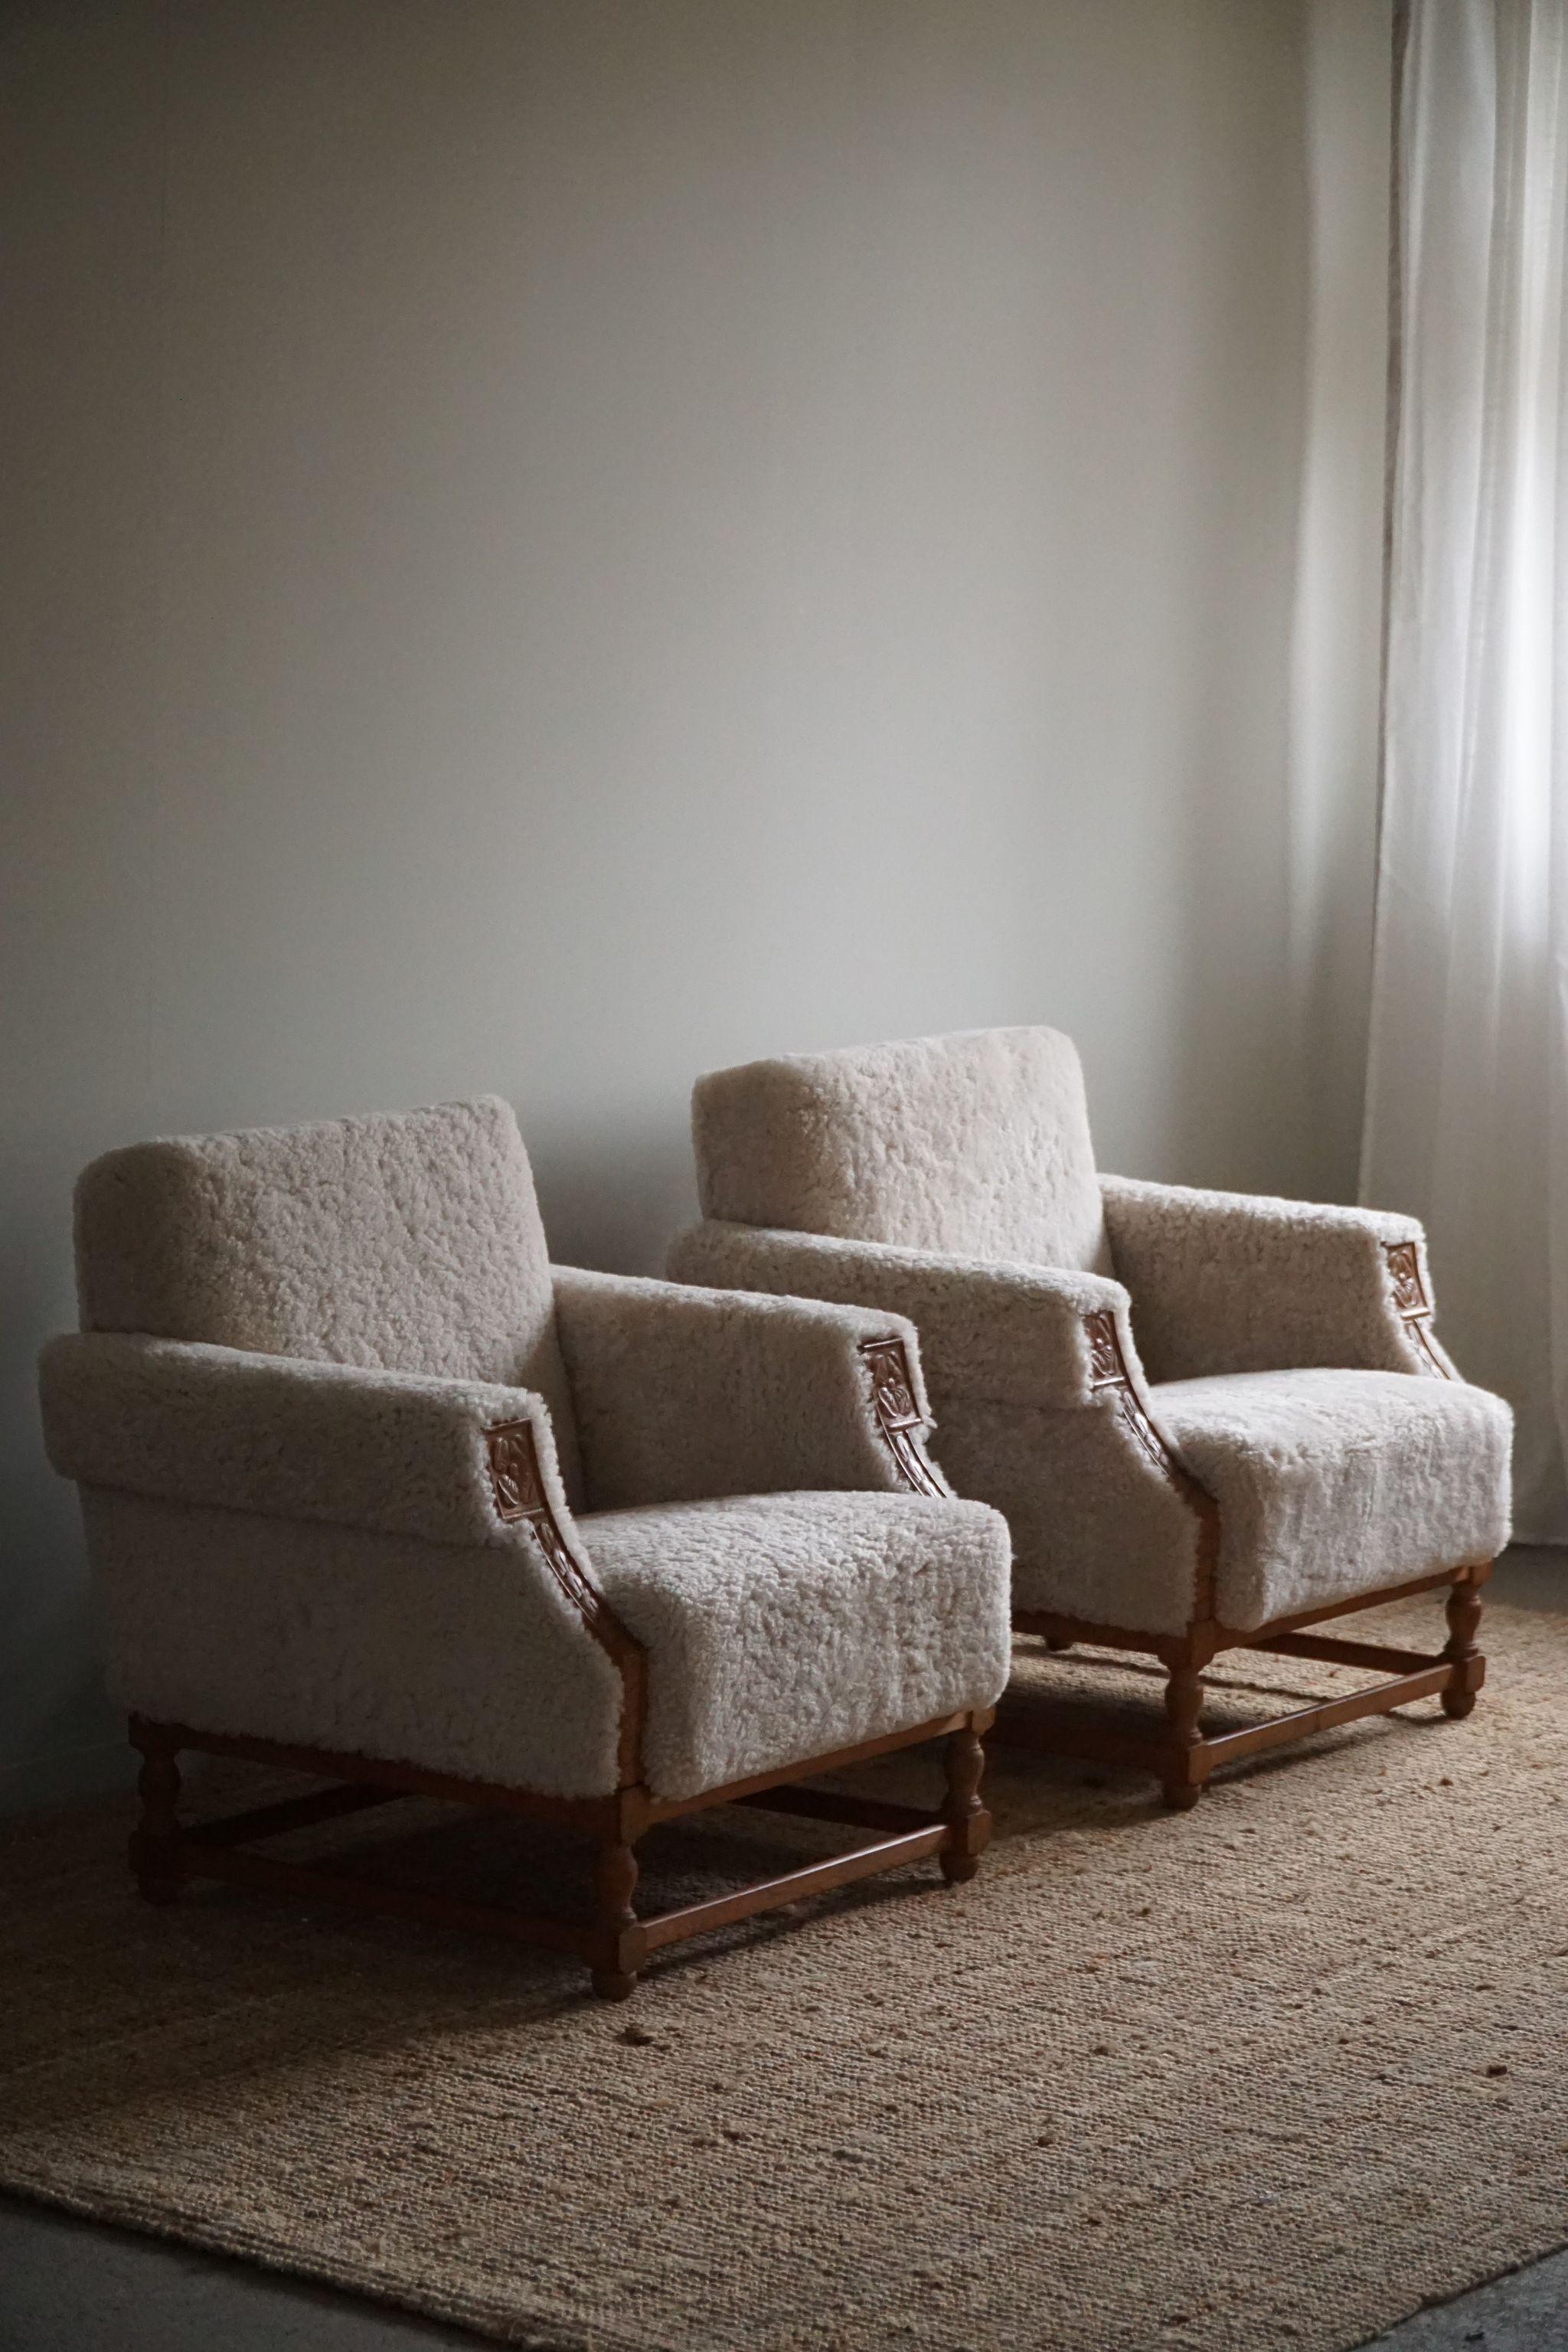 20th Century Pair of Danish Mid-Century Modern Lounge Chairs in Shearling Lambswool, 1950s